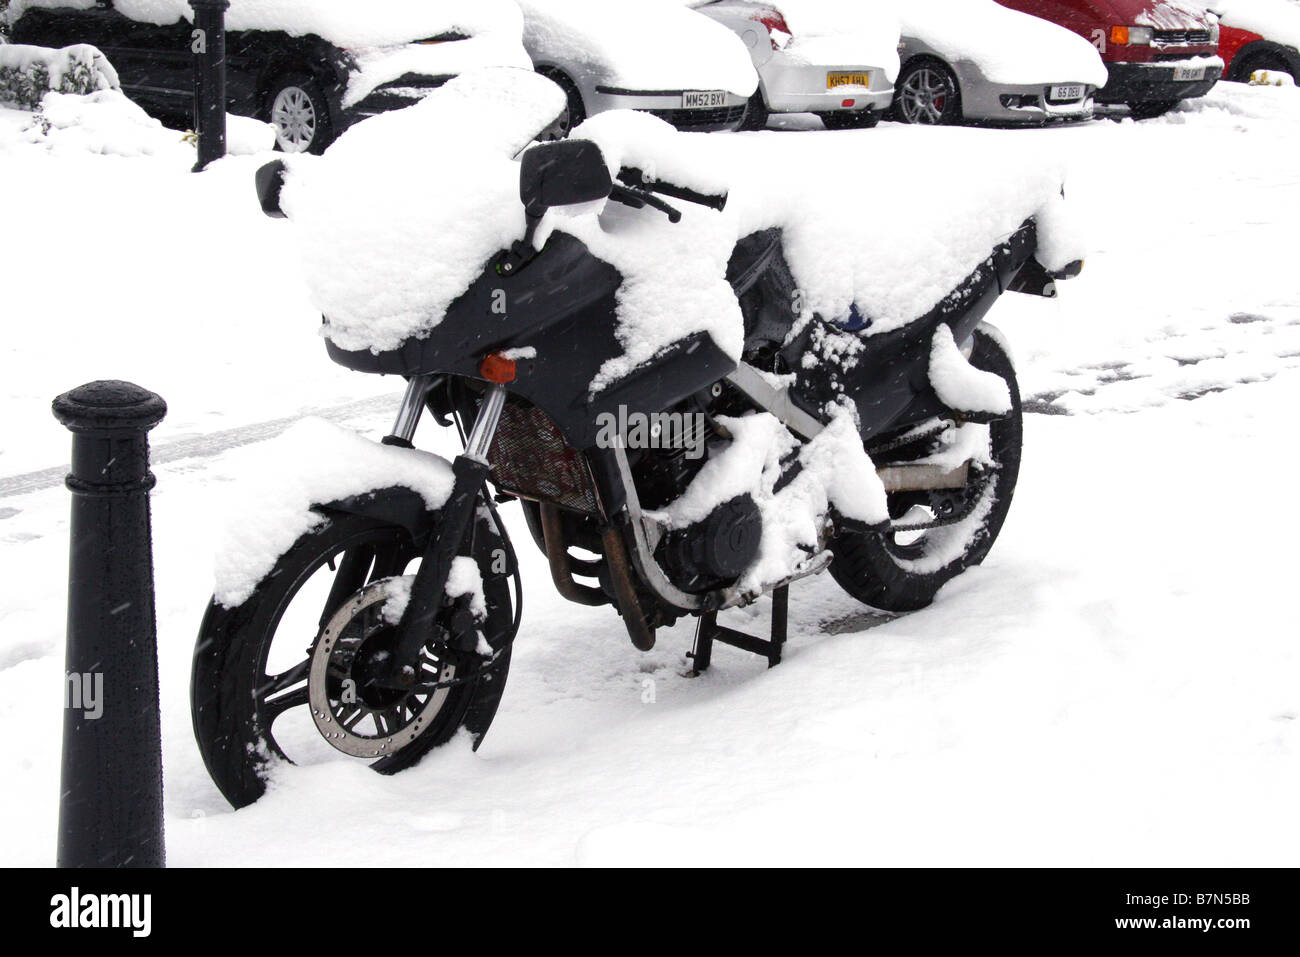 Motorbike covered in snow Stock Photo